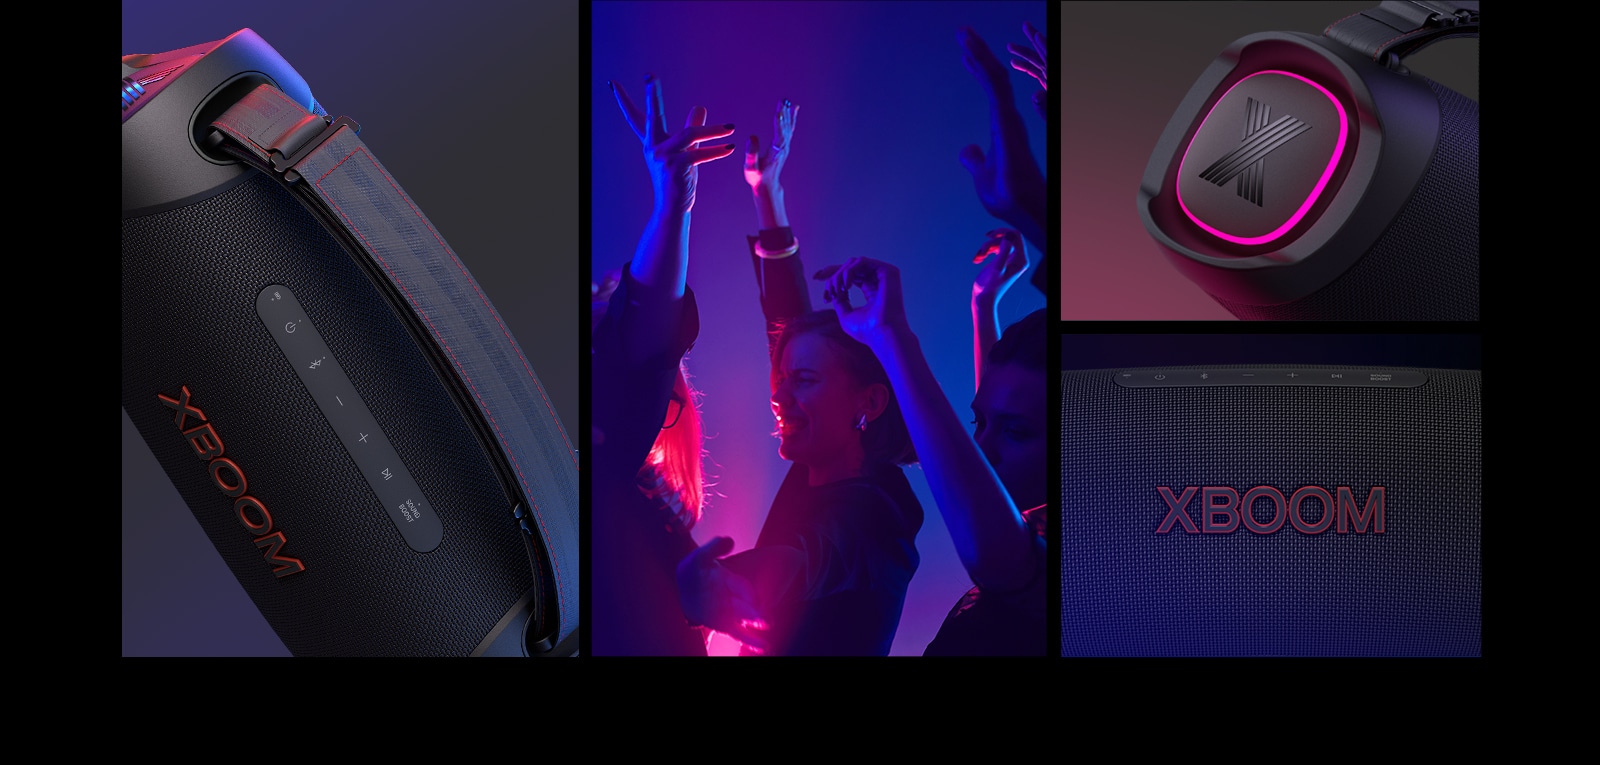 College. From left, close up view of LG XBOOM Go XG8T. Next, an image of people enjoying the music. On the right from top to bottom: close-up view of the speaker with pink lighting and XBOOM logo.